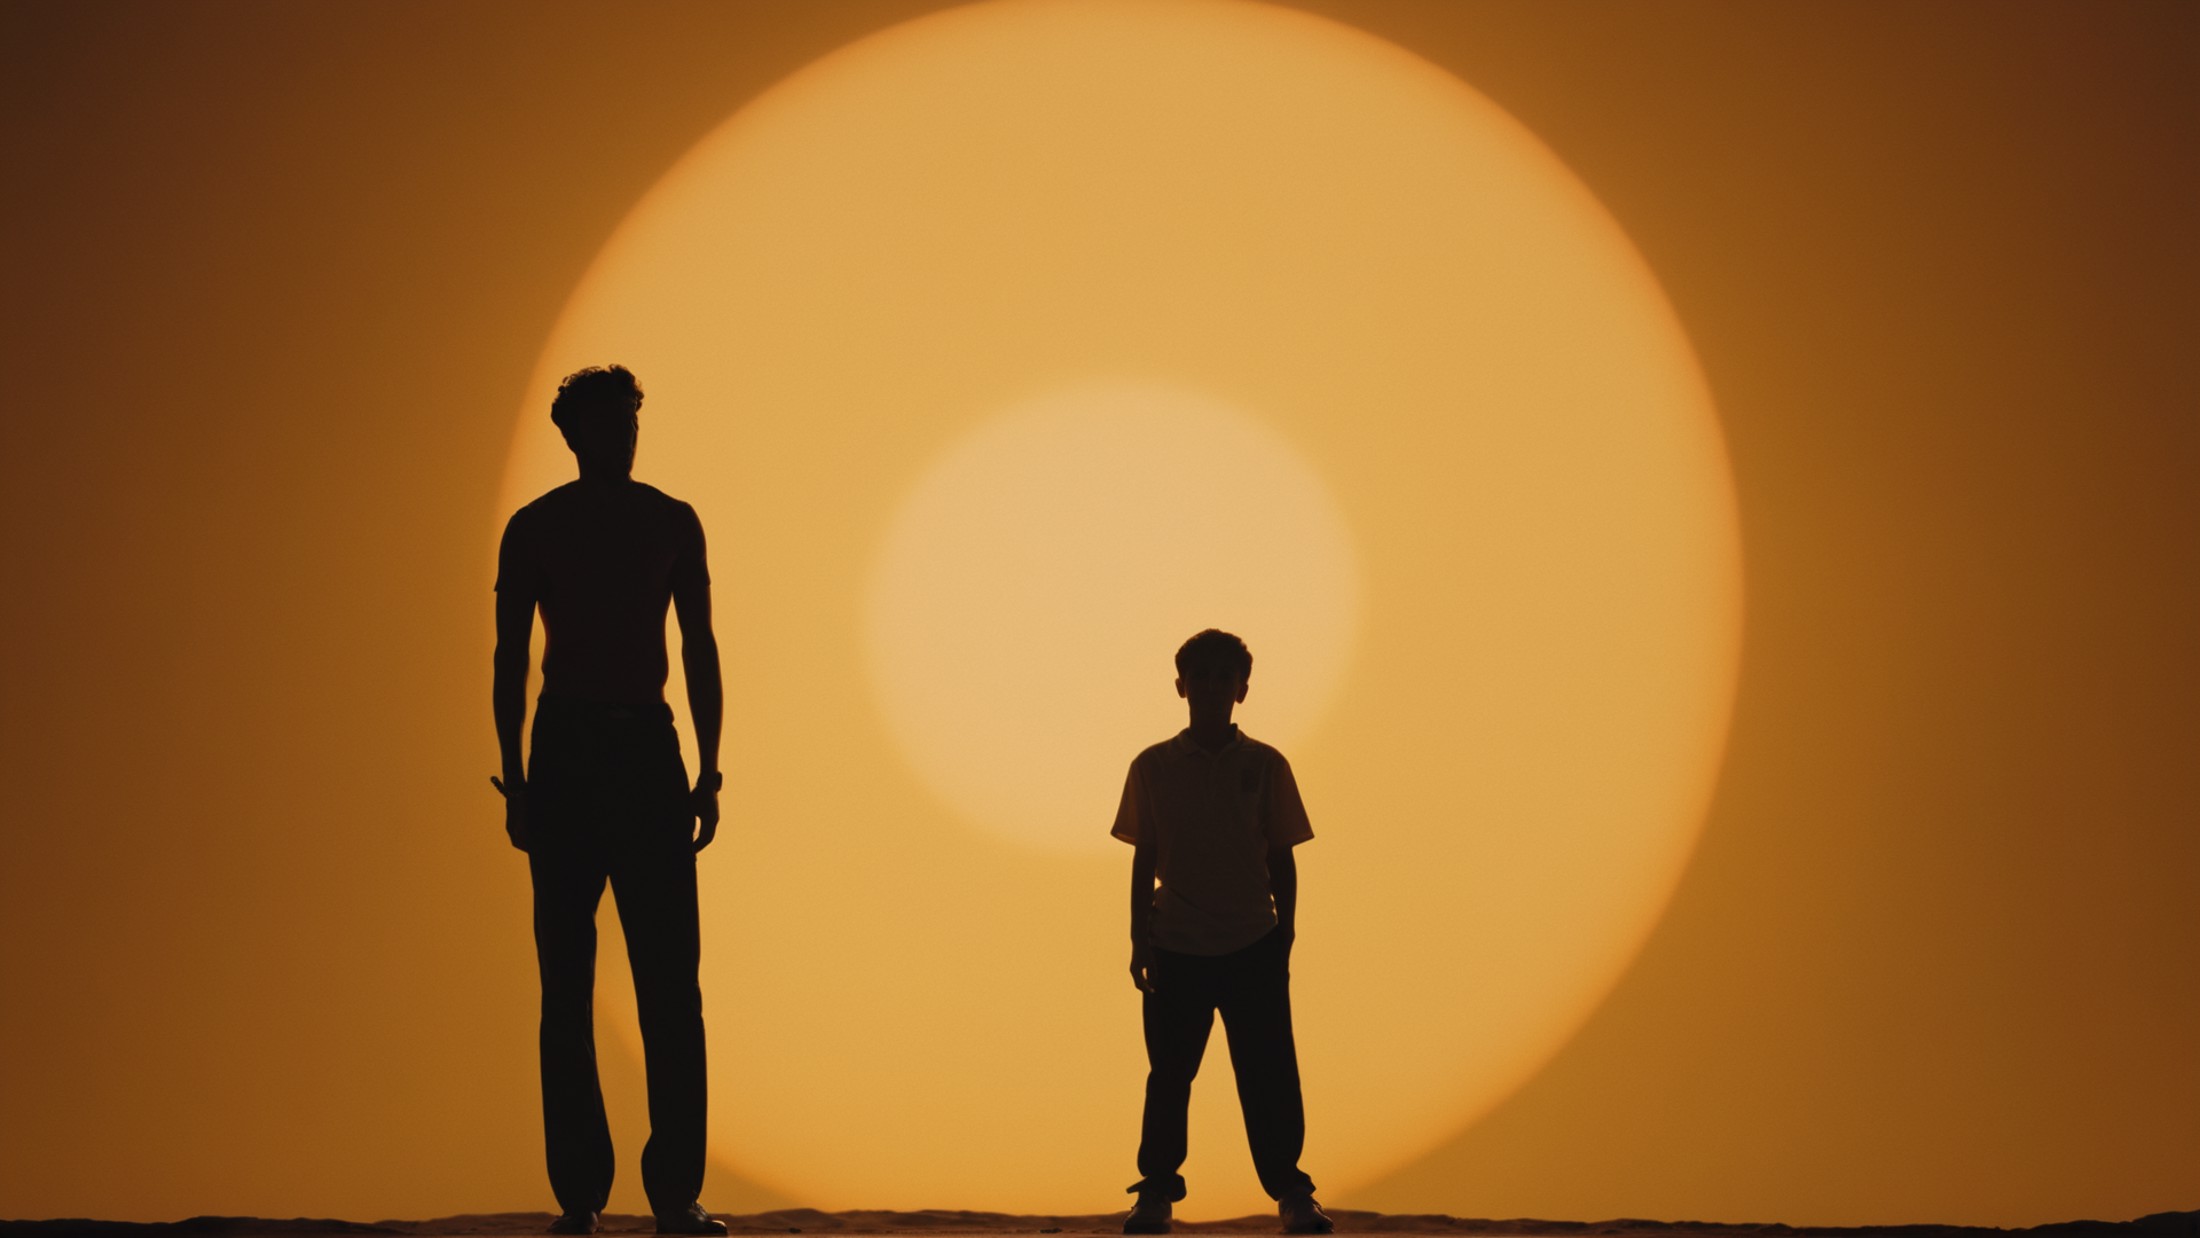 cinematic film still of  <lora:silhouette style:1>
A silhouette photo of a man standing in front of a large sun,1boy,stand...